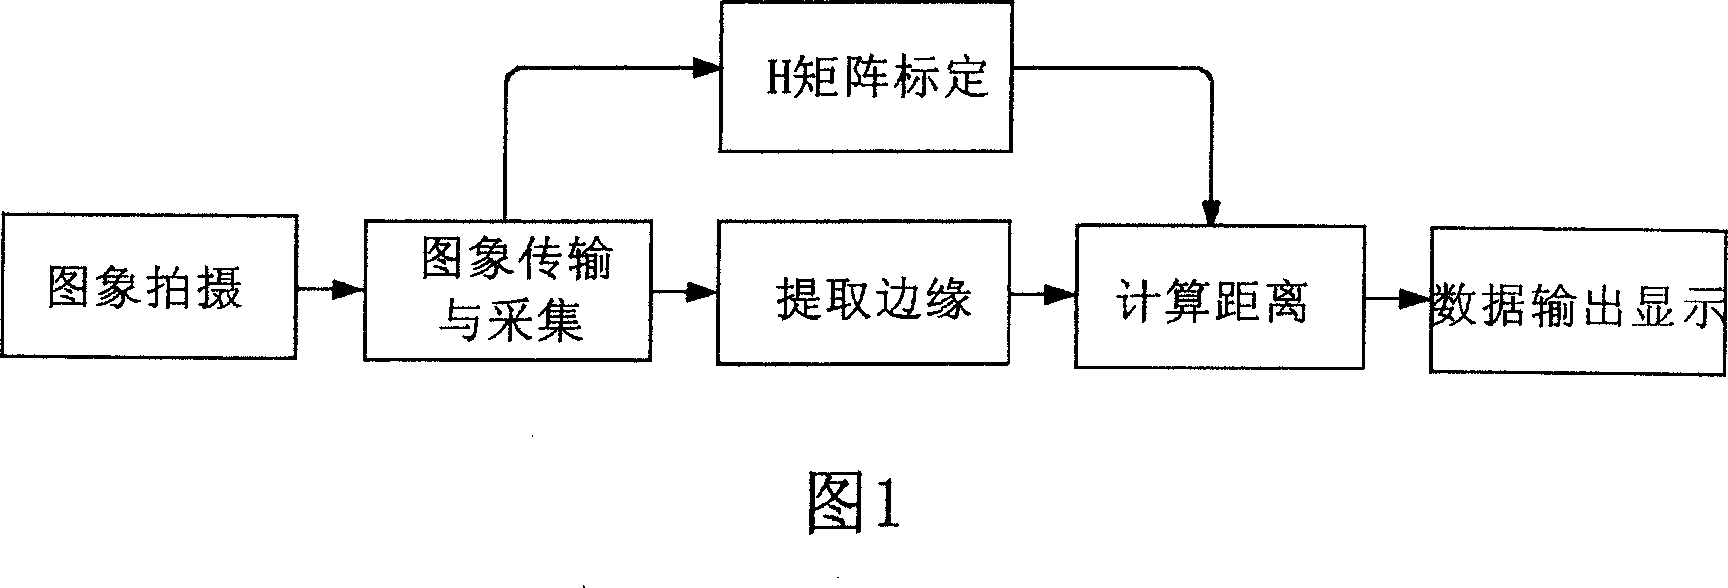 Method and device for positioning container lorry mobile in port